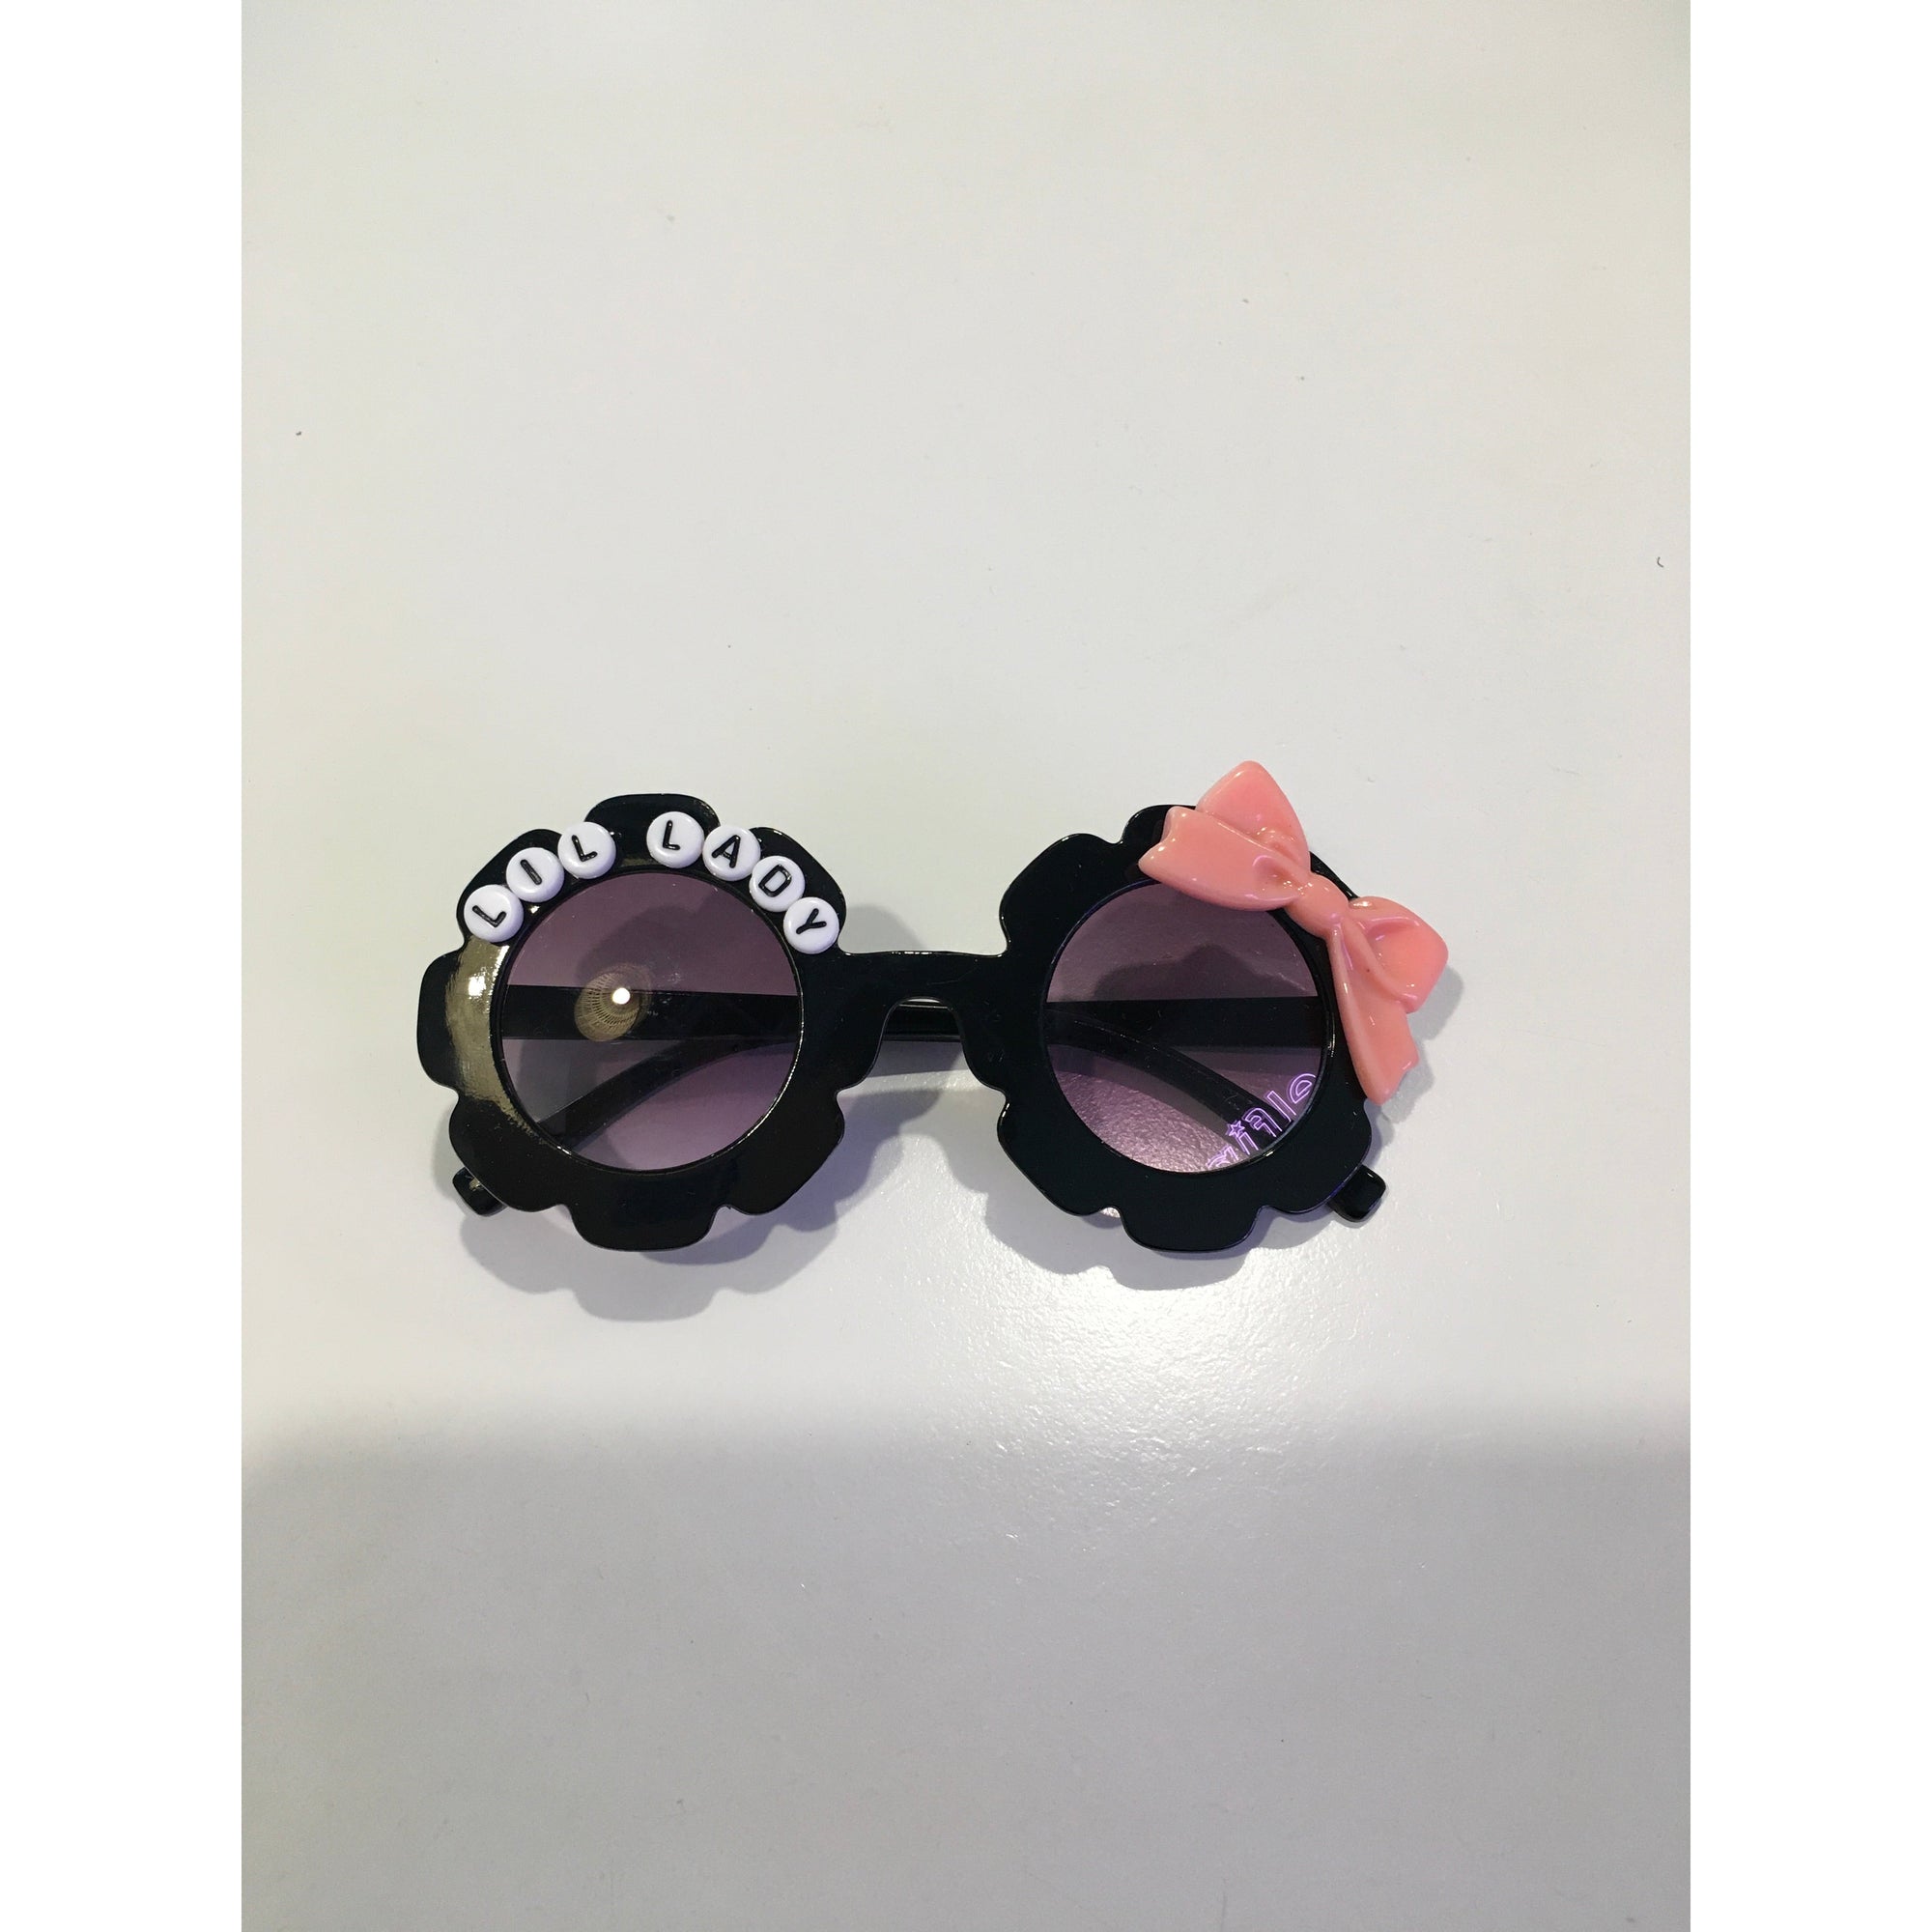 Lil lady pink bow sunglasses